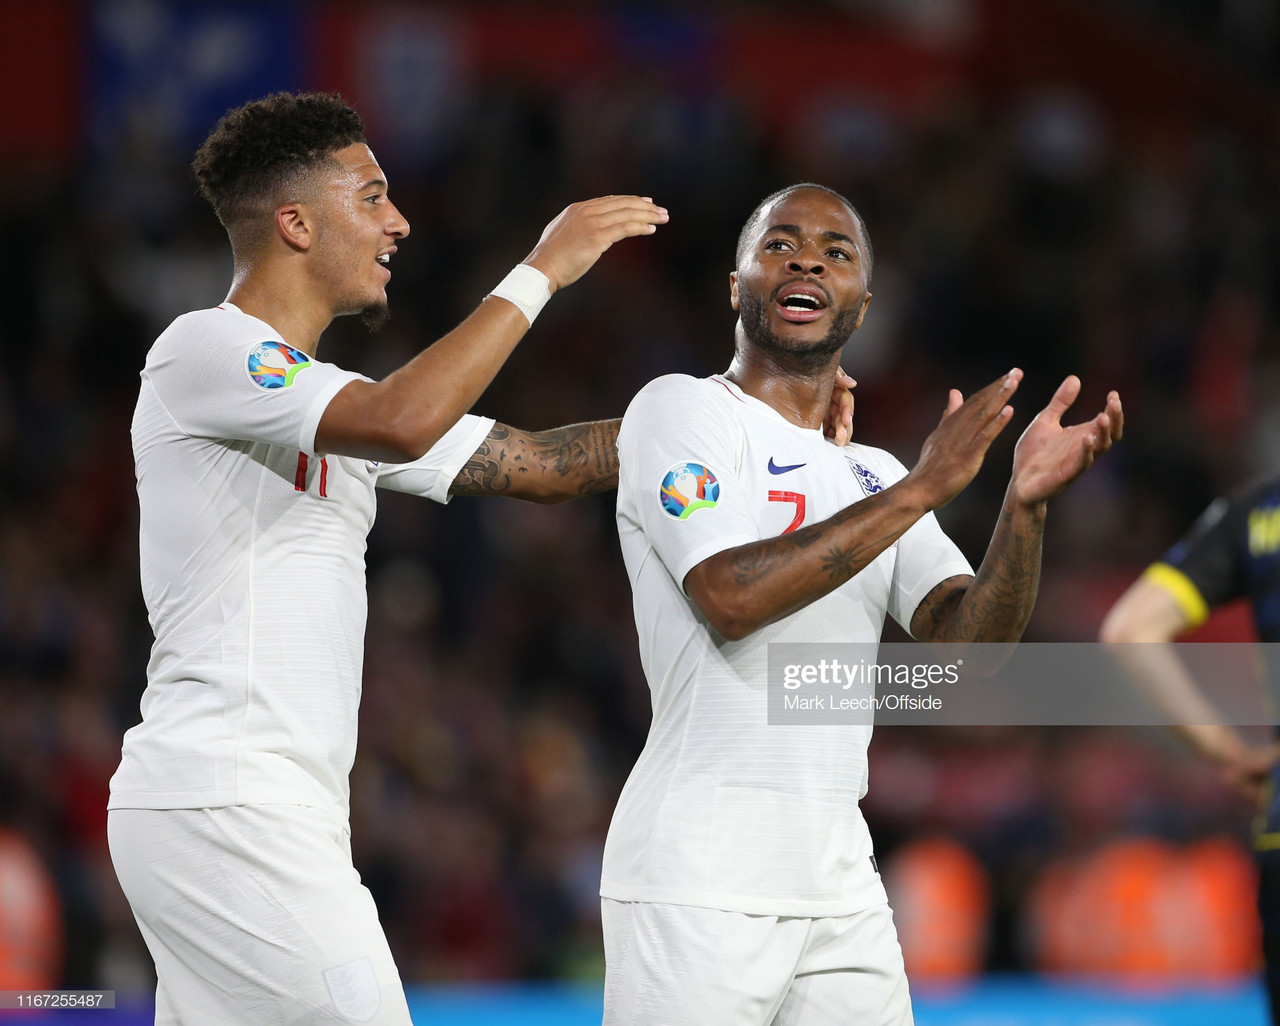 England 5-3 Kosovo: Raheem Sterling leads England to action-packed victory